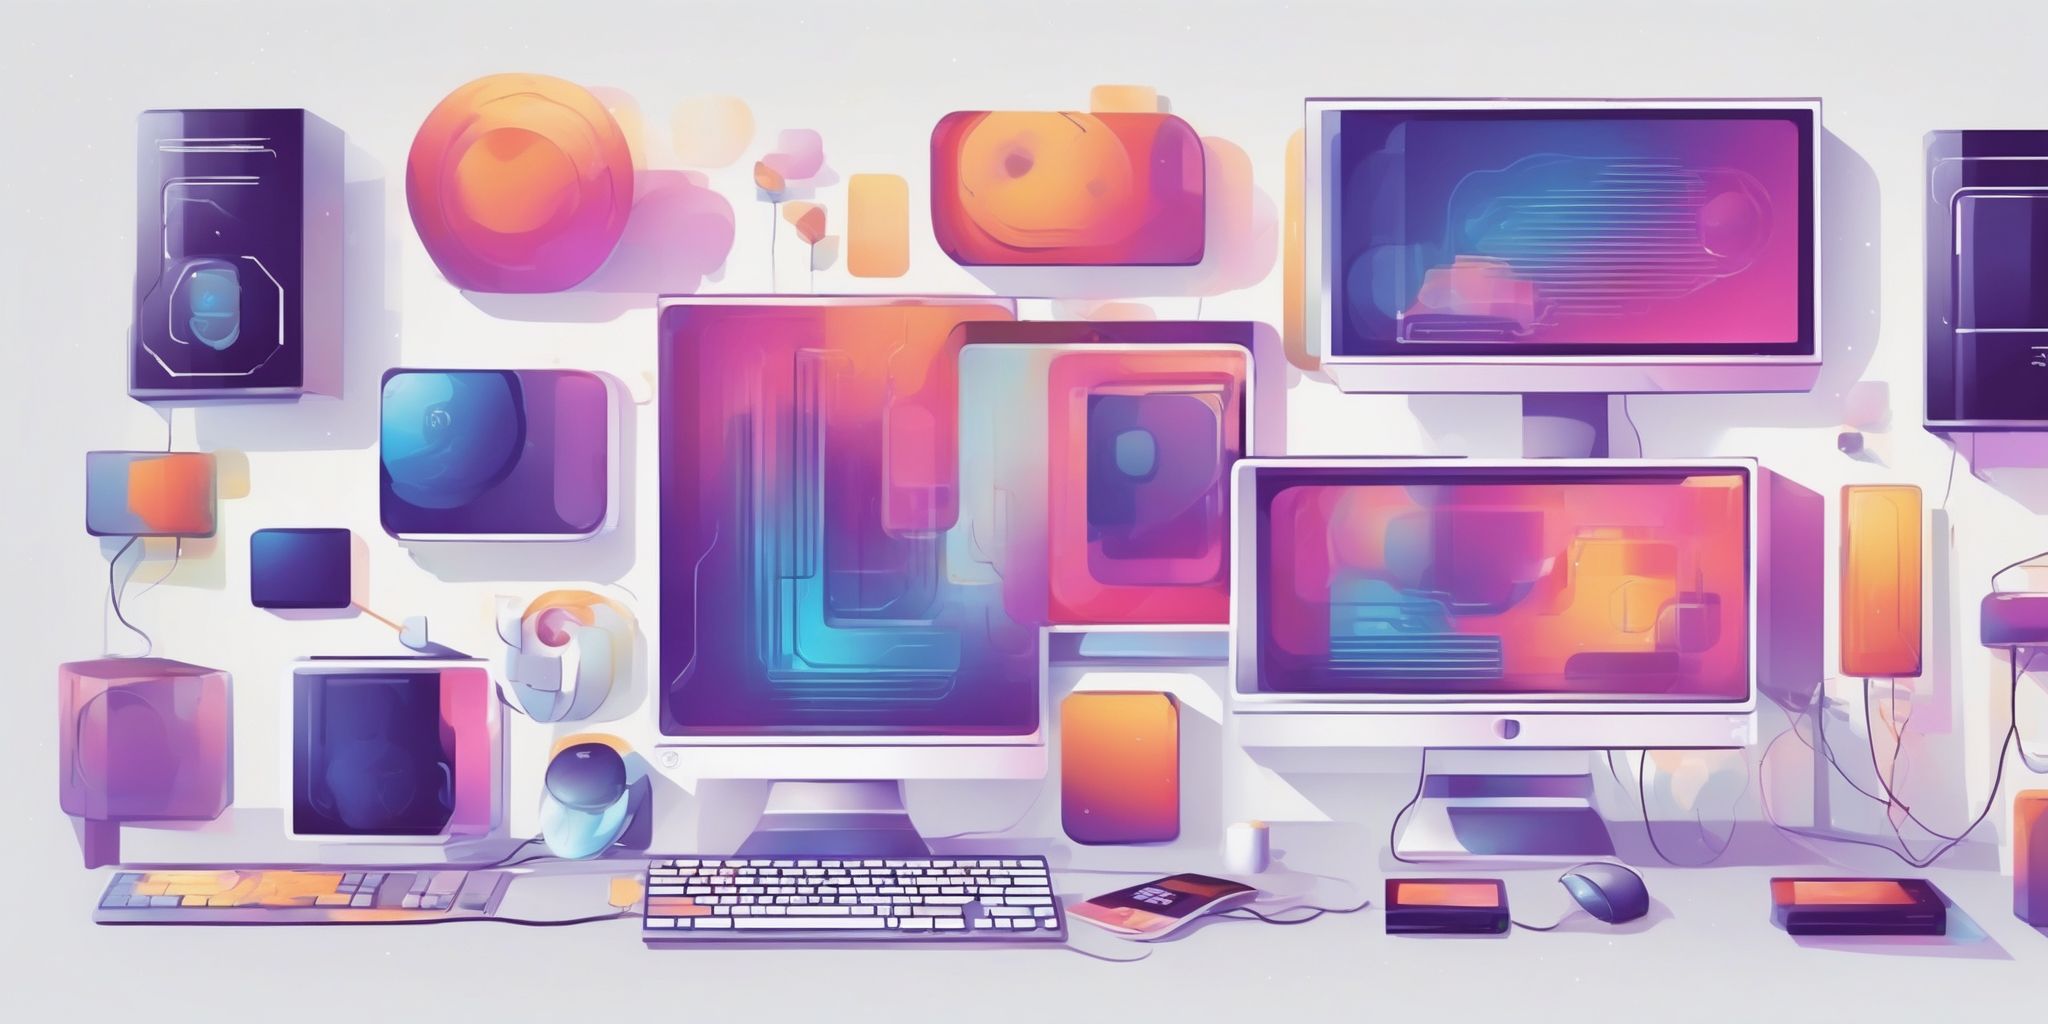 computer in illustration style with gradients and white background